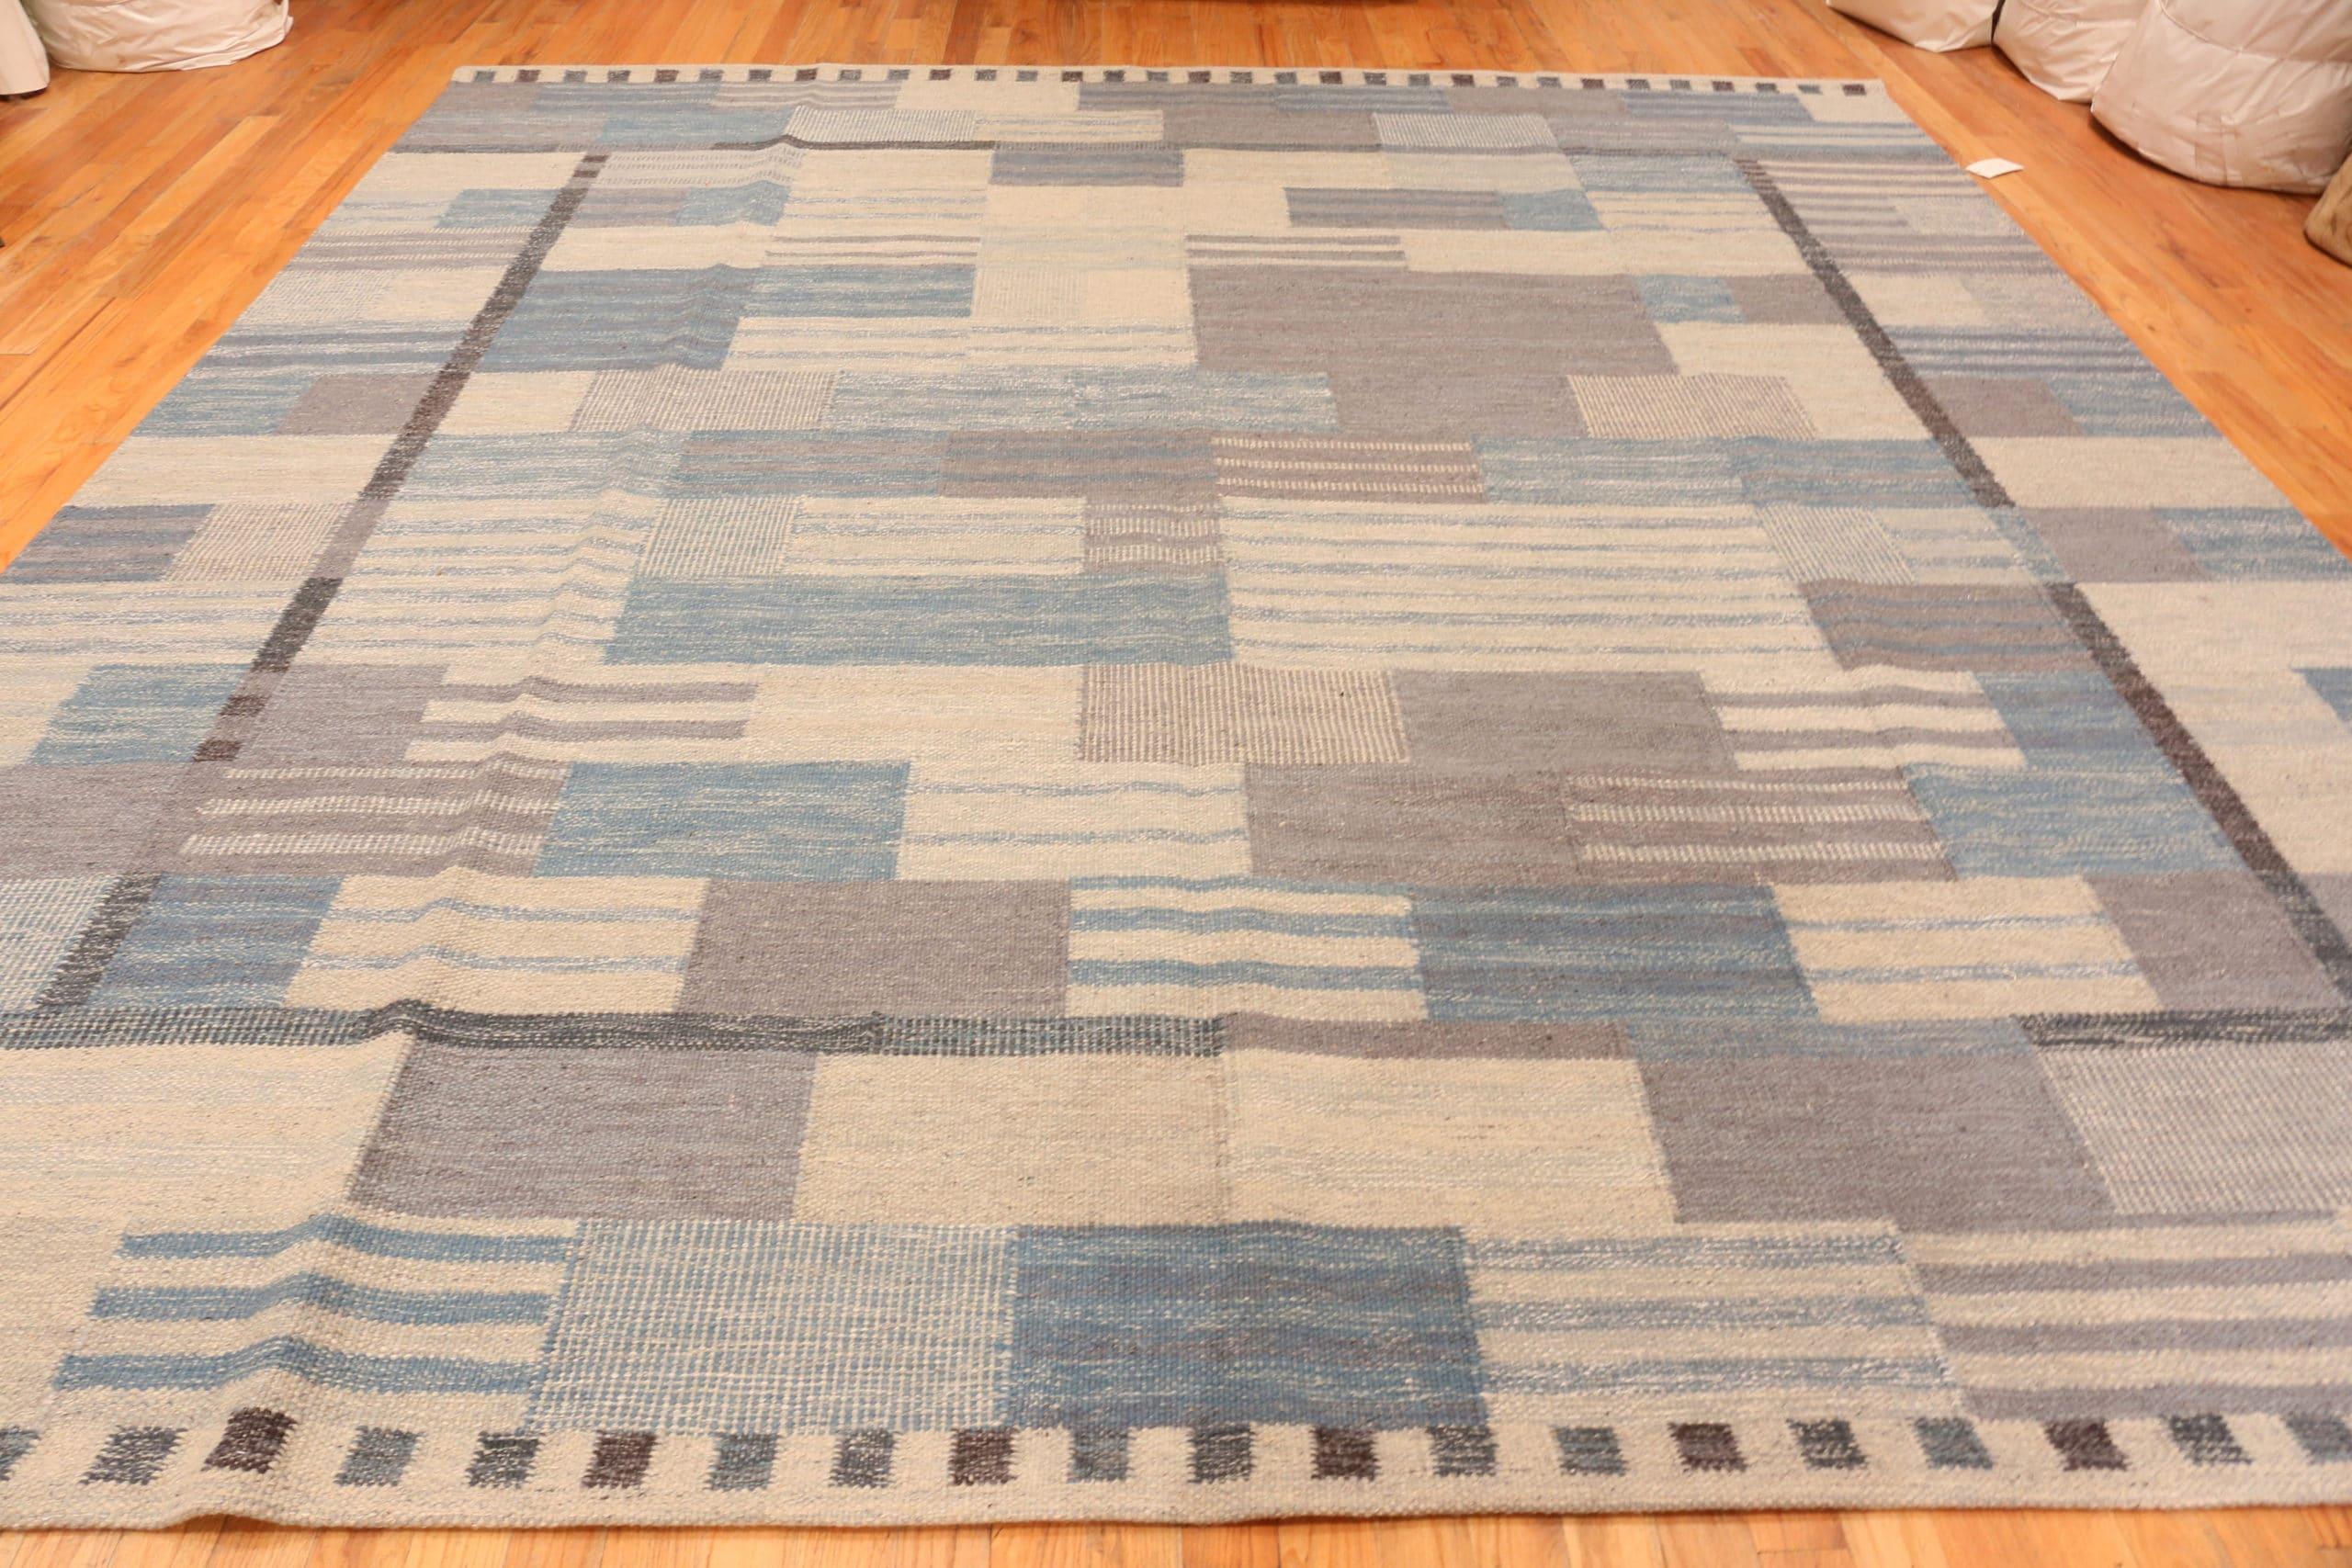 Hand-Woven Square Modern Geometric Swedish Inspired Flat Woven Area Rug. 12 ft x 12 ft 1 in